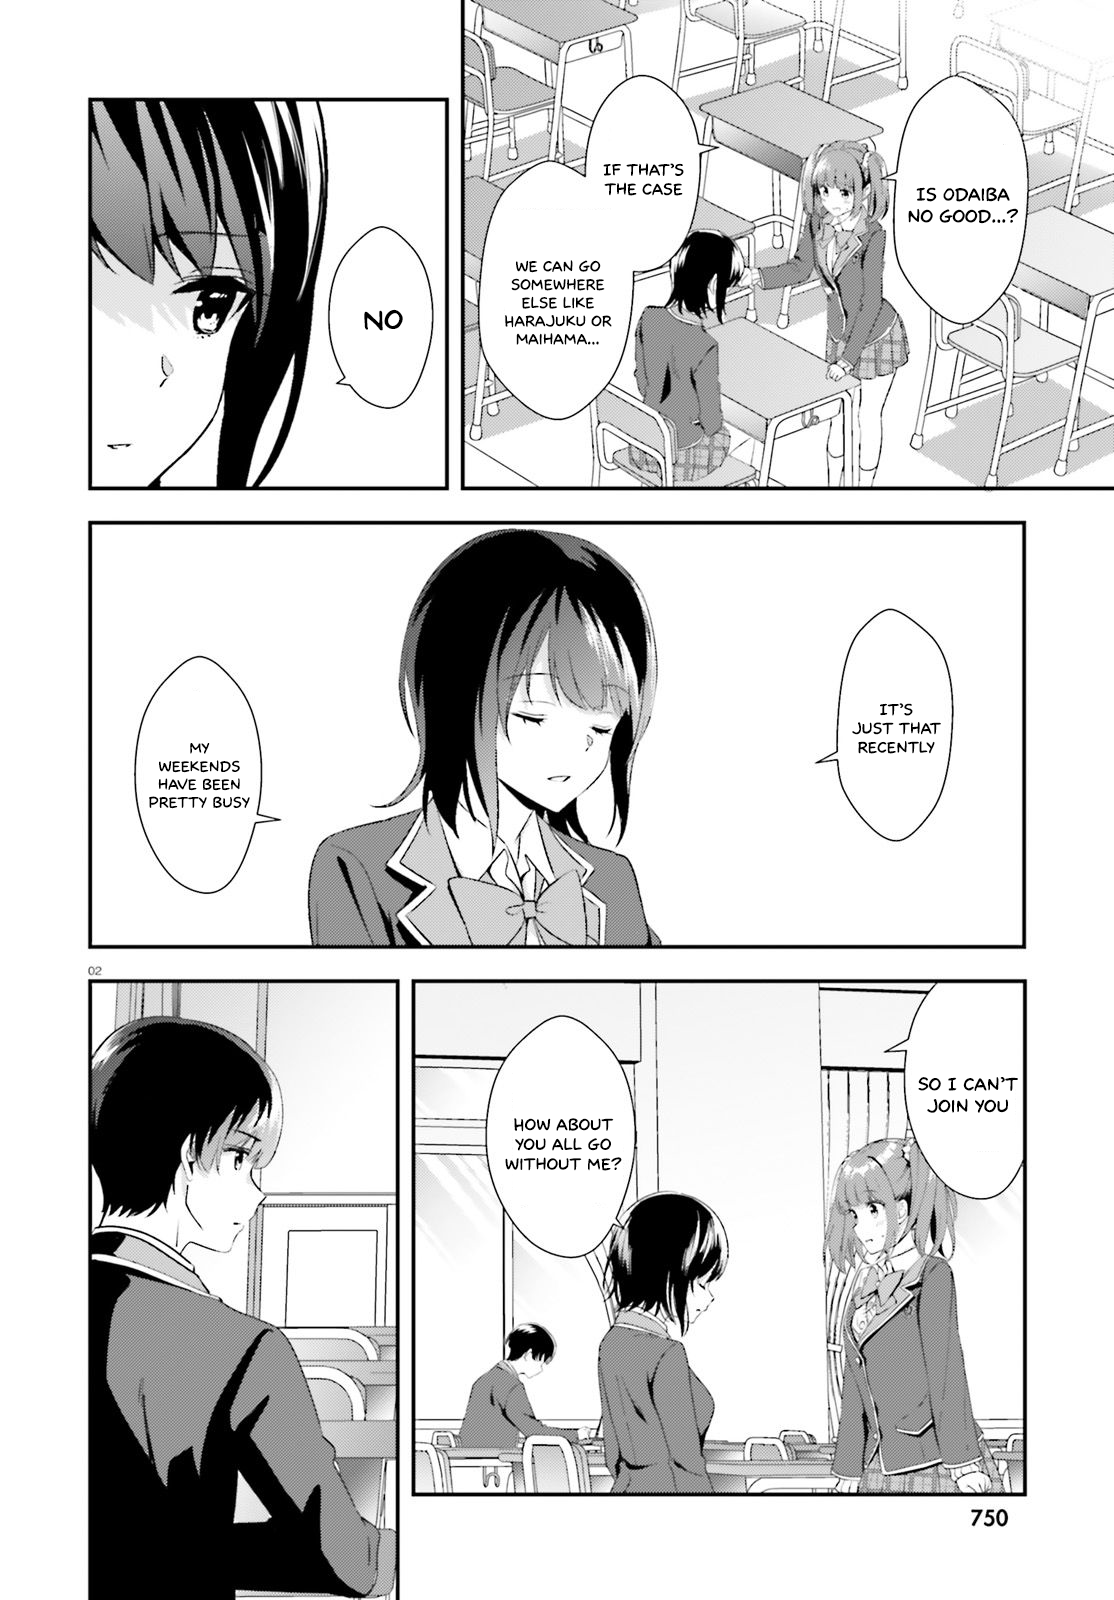 Bizarre Love Triangle Vol.2 Chapter 9: Plans For The Weekend - Picture 3